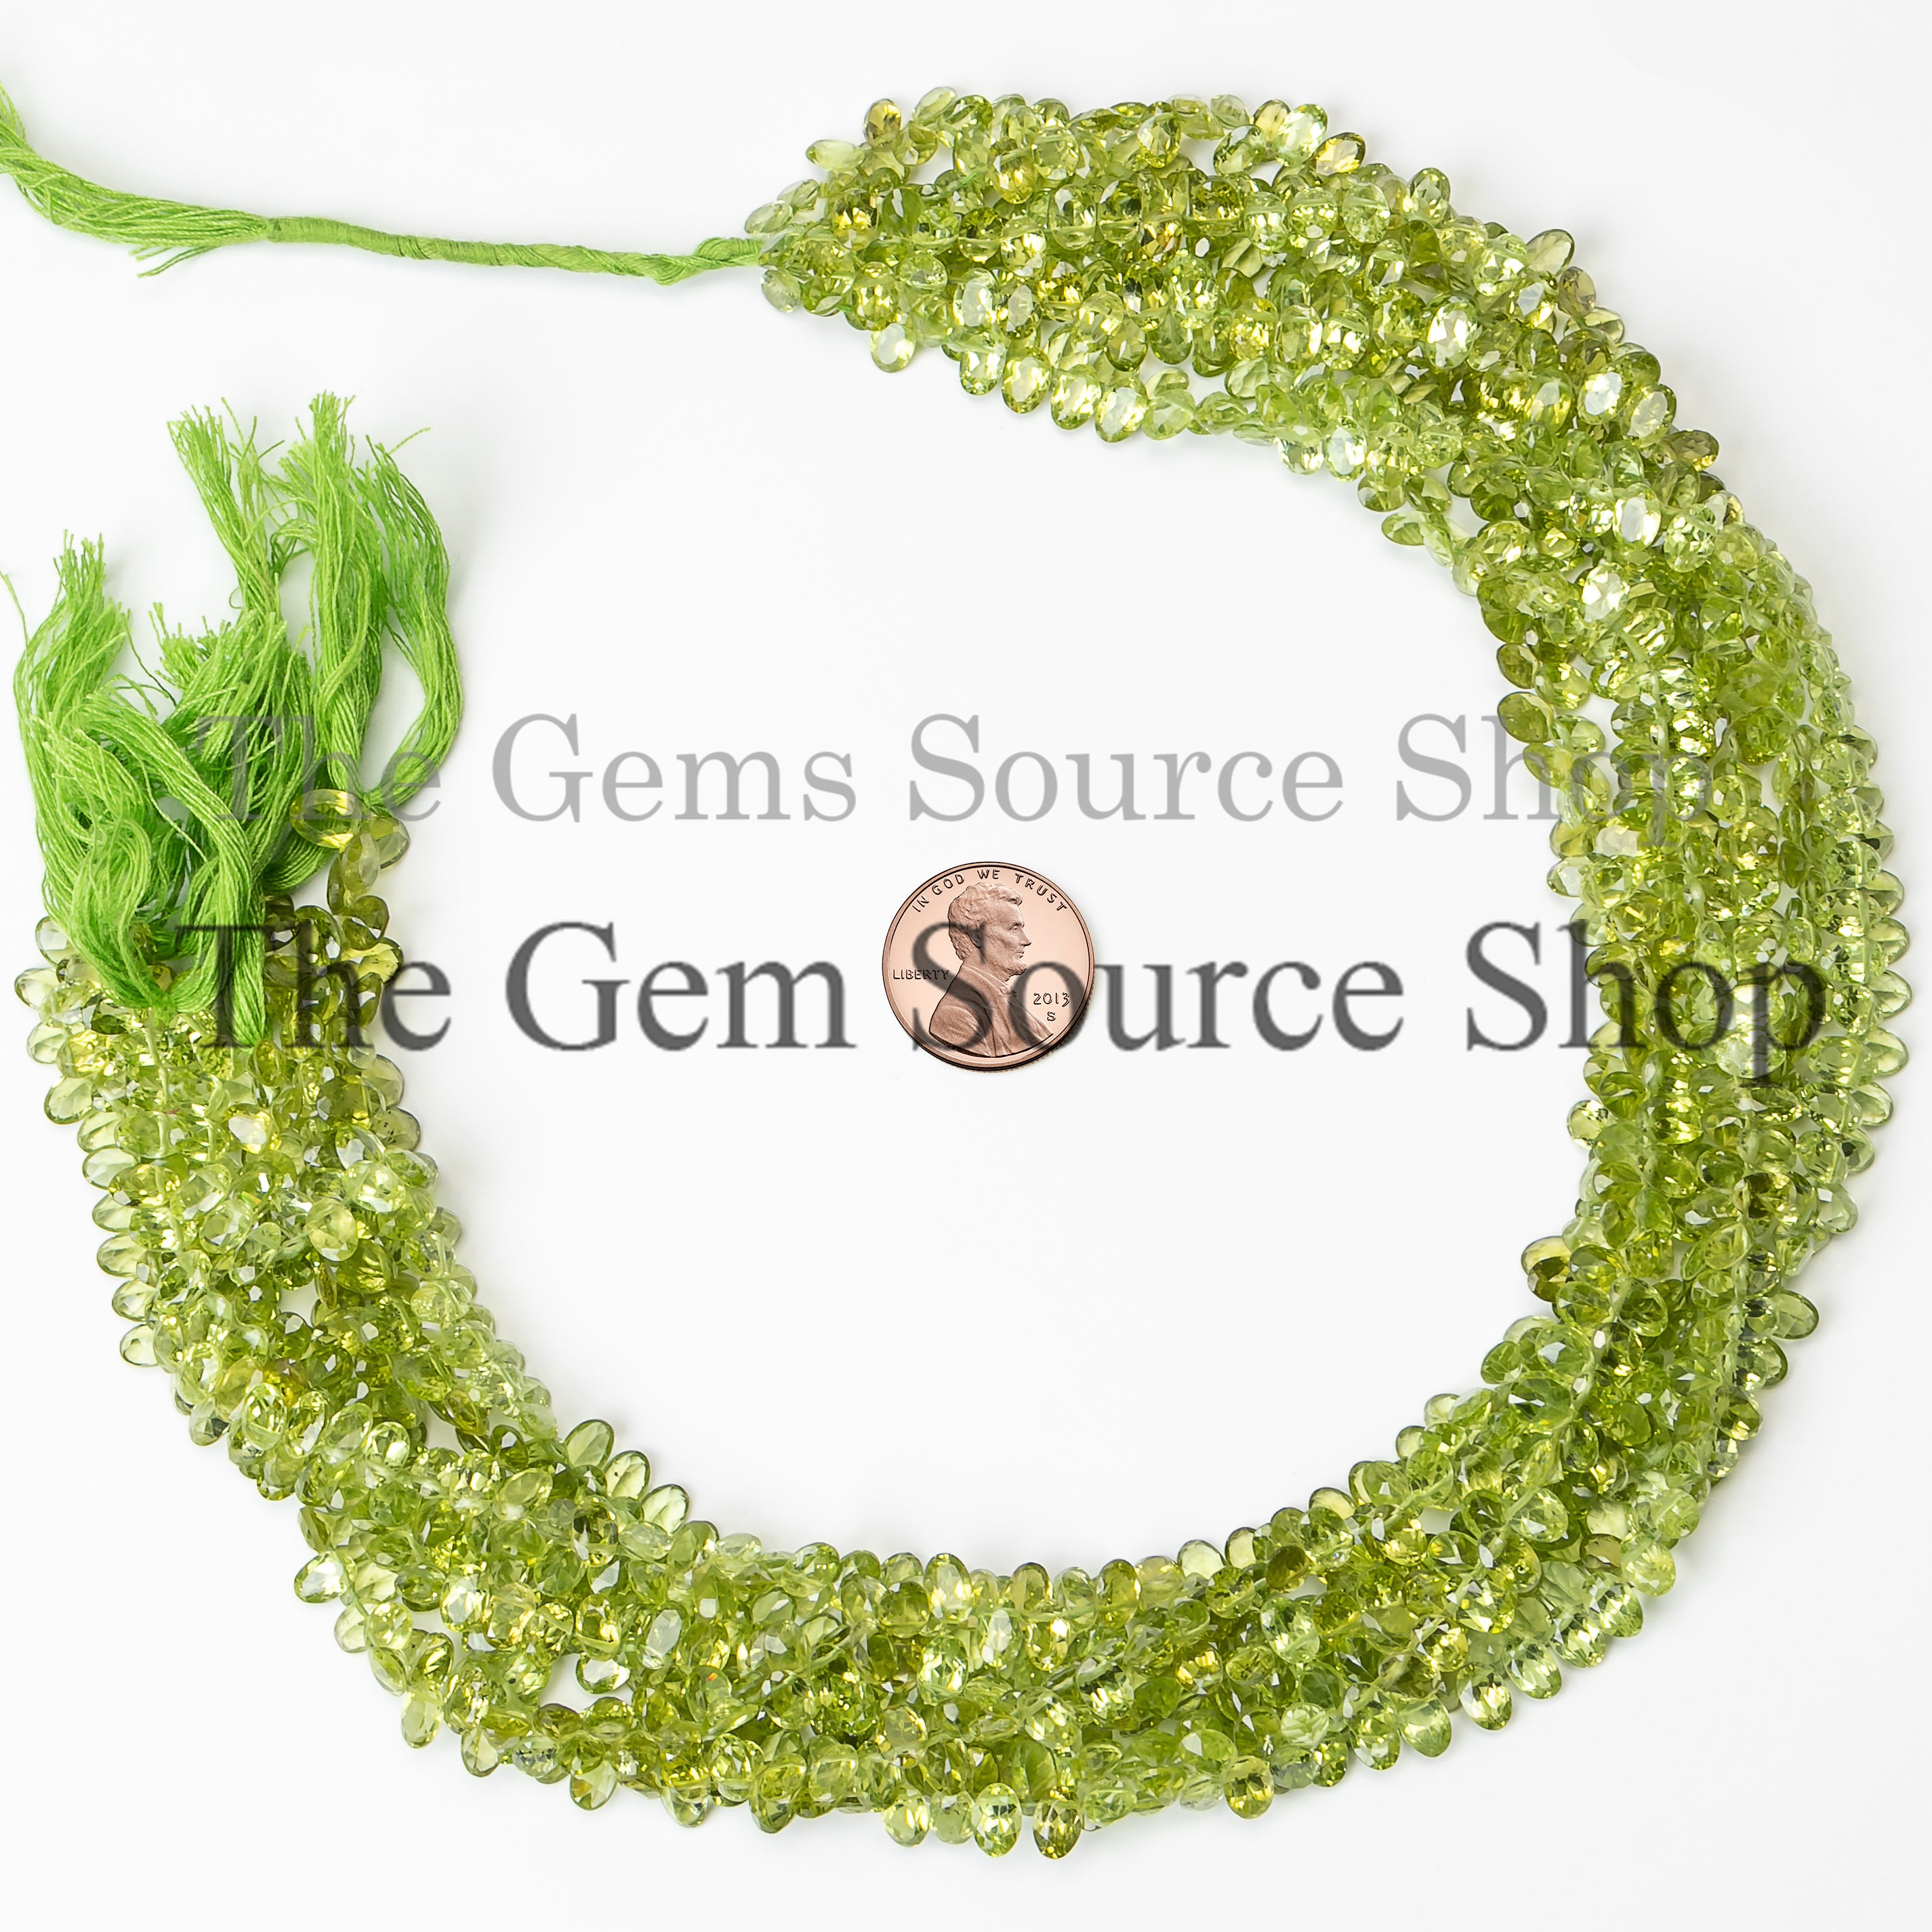 Peridot Faceted Gemstone Beads, Peridot Faceted Beads, Peridot Beads, Peridot Oval Beads, 4x6-6x8mm Gemstone Beads Briolette, Jewelry Beads